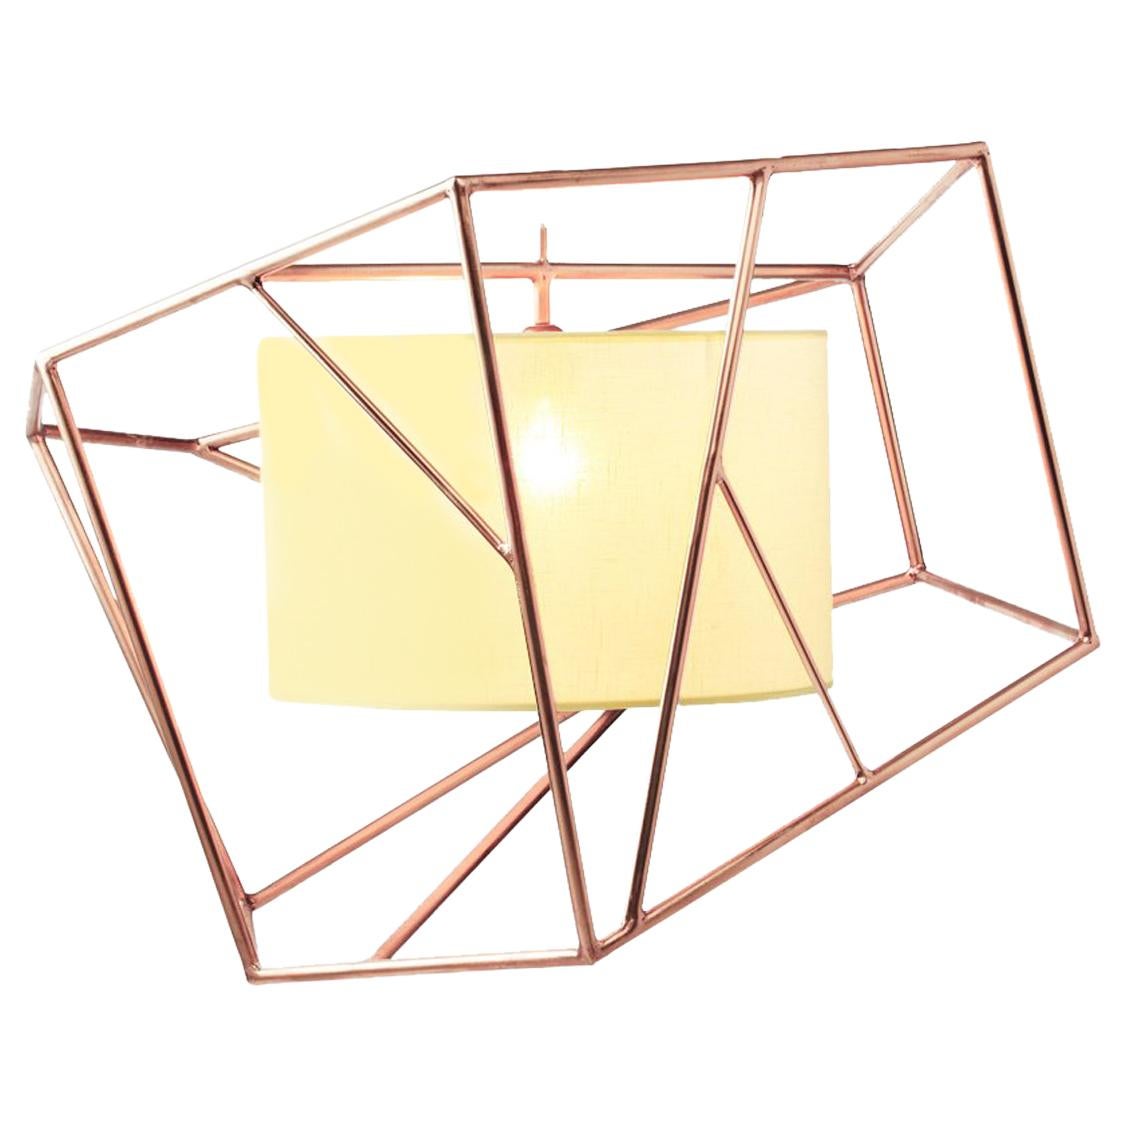 Contemporary Art Deco Inspired Star Pendant Lamp Polished Copper Linen Shade For Sale